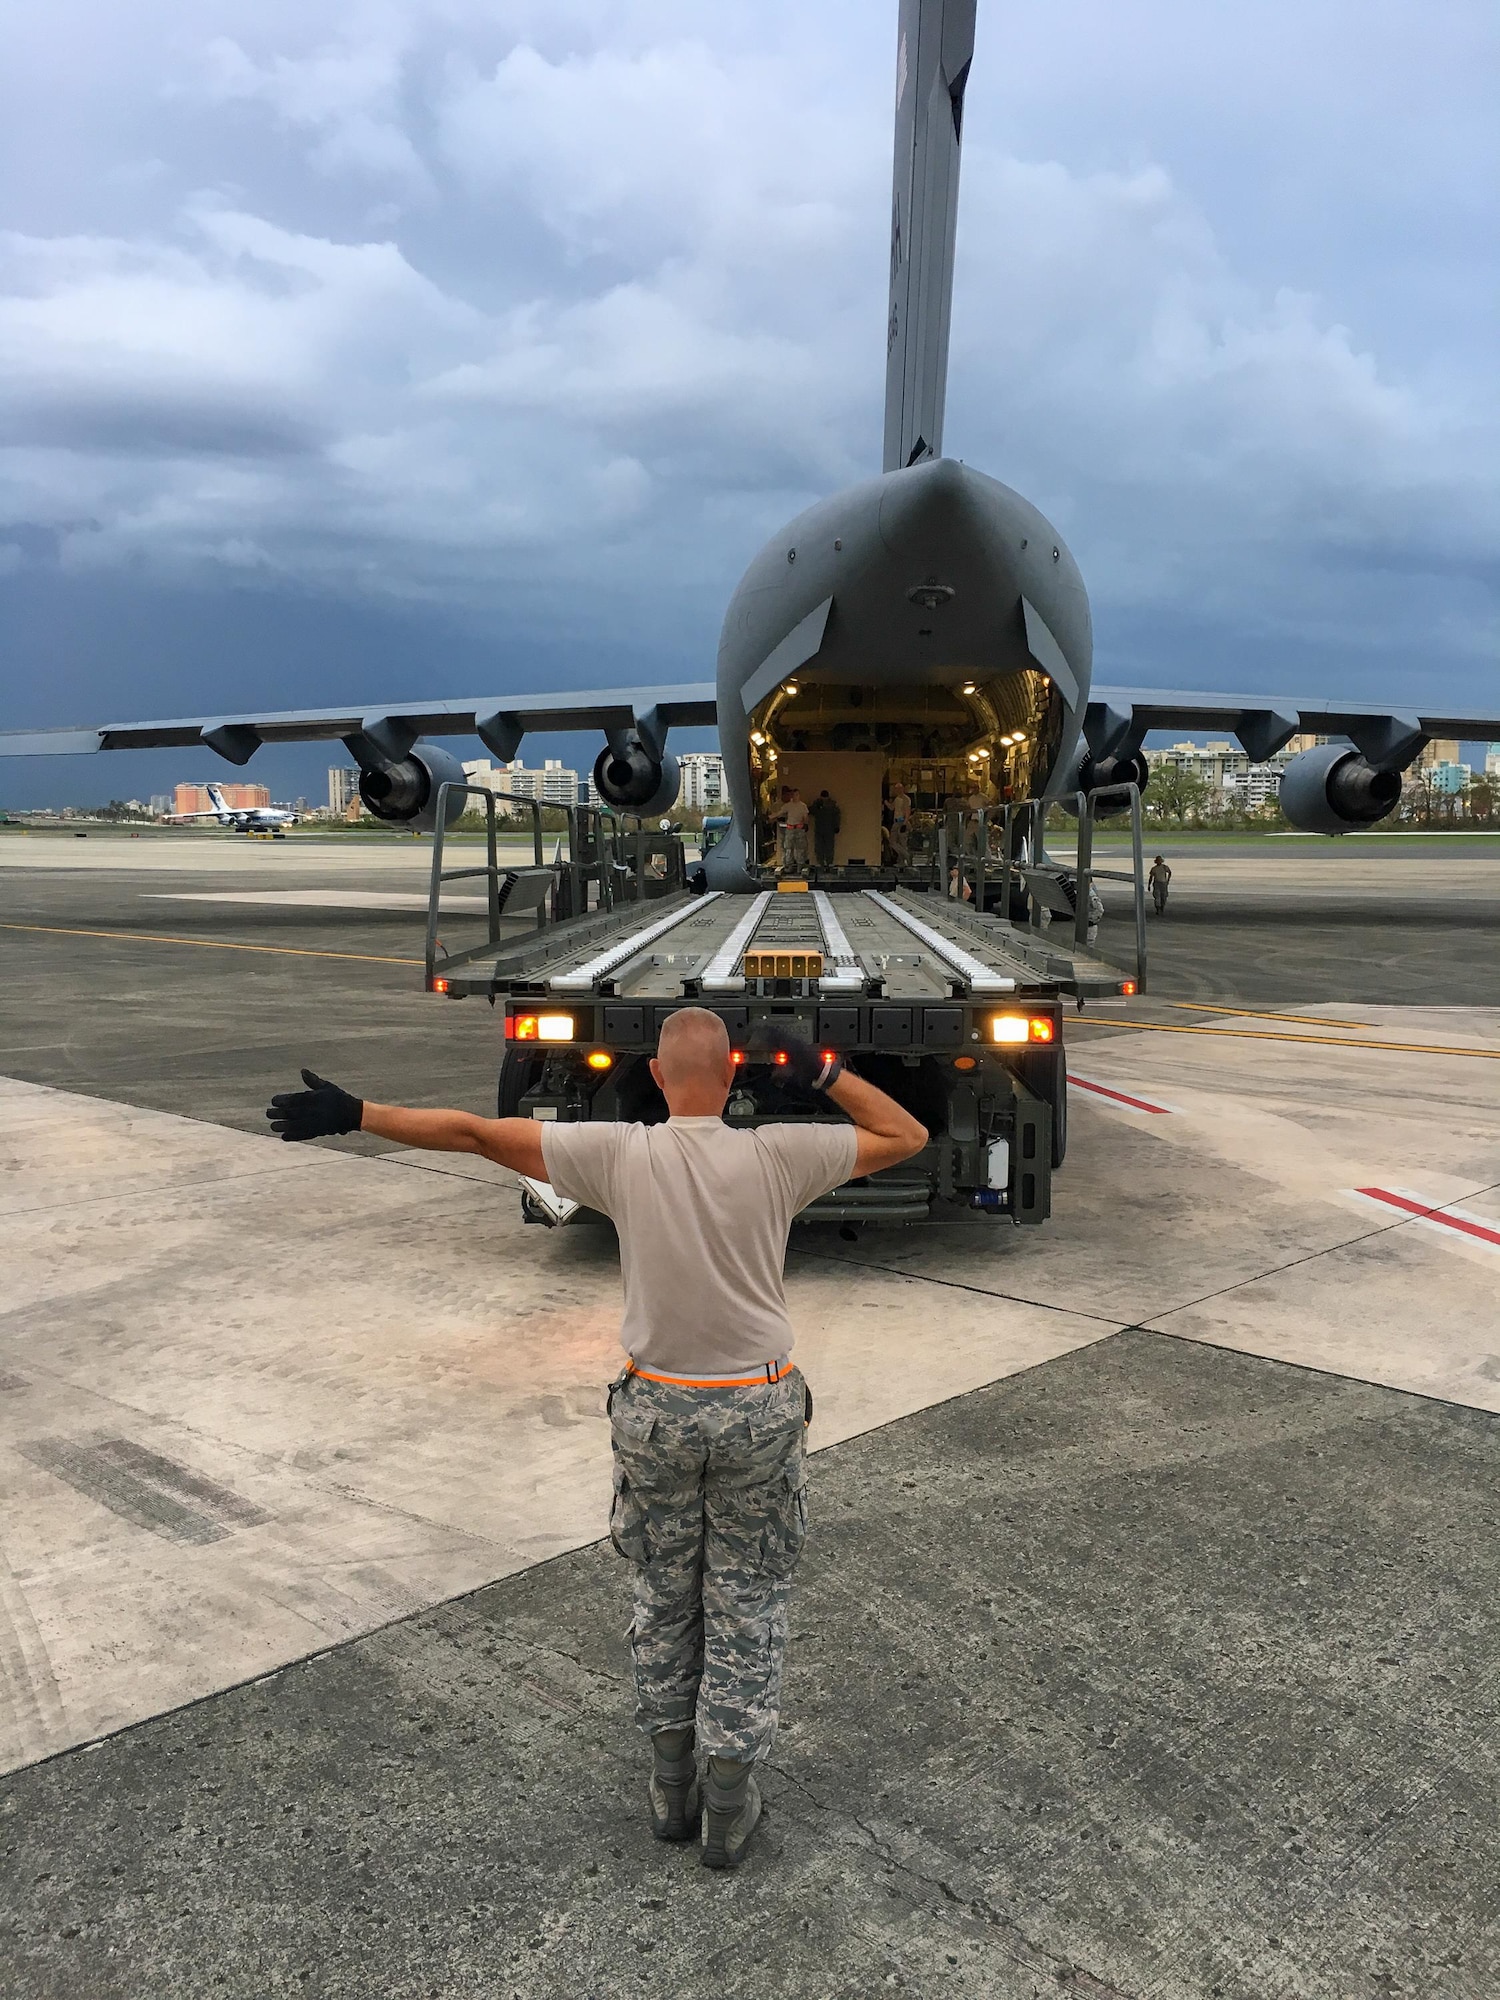 An Airman from the Kentucky Air National Guard’s 123rd Contingency Response Group directs the dowload of relief supplies from a U.S. Air Force C-17 aircraft at Luis Muñoz Marín International Airport in San Juan, Puerto Rico, in the wake of Hurricane Maria Oct. 5, 2017. The unit’s Airmen established an aerial port of debarkation upon arrival here Sept. 23, and have processed more than 7.2 million pounds of cargo and humanitarian aid for distribution in the first three weeks of the operation. (U.S. Air National Guard photo by Lt. Col. Dale Greer)